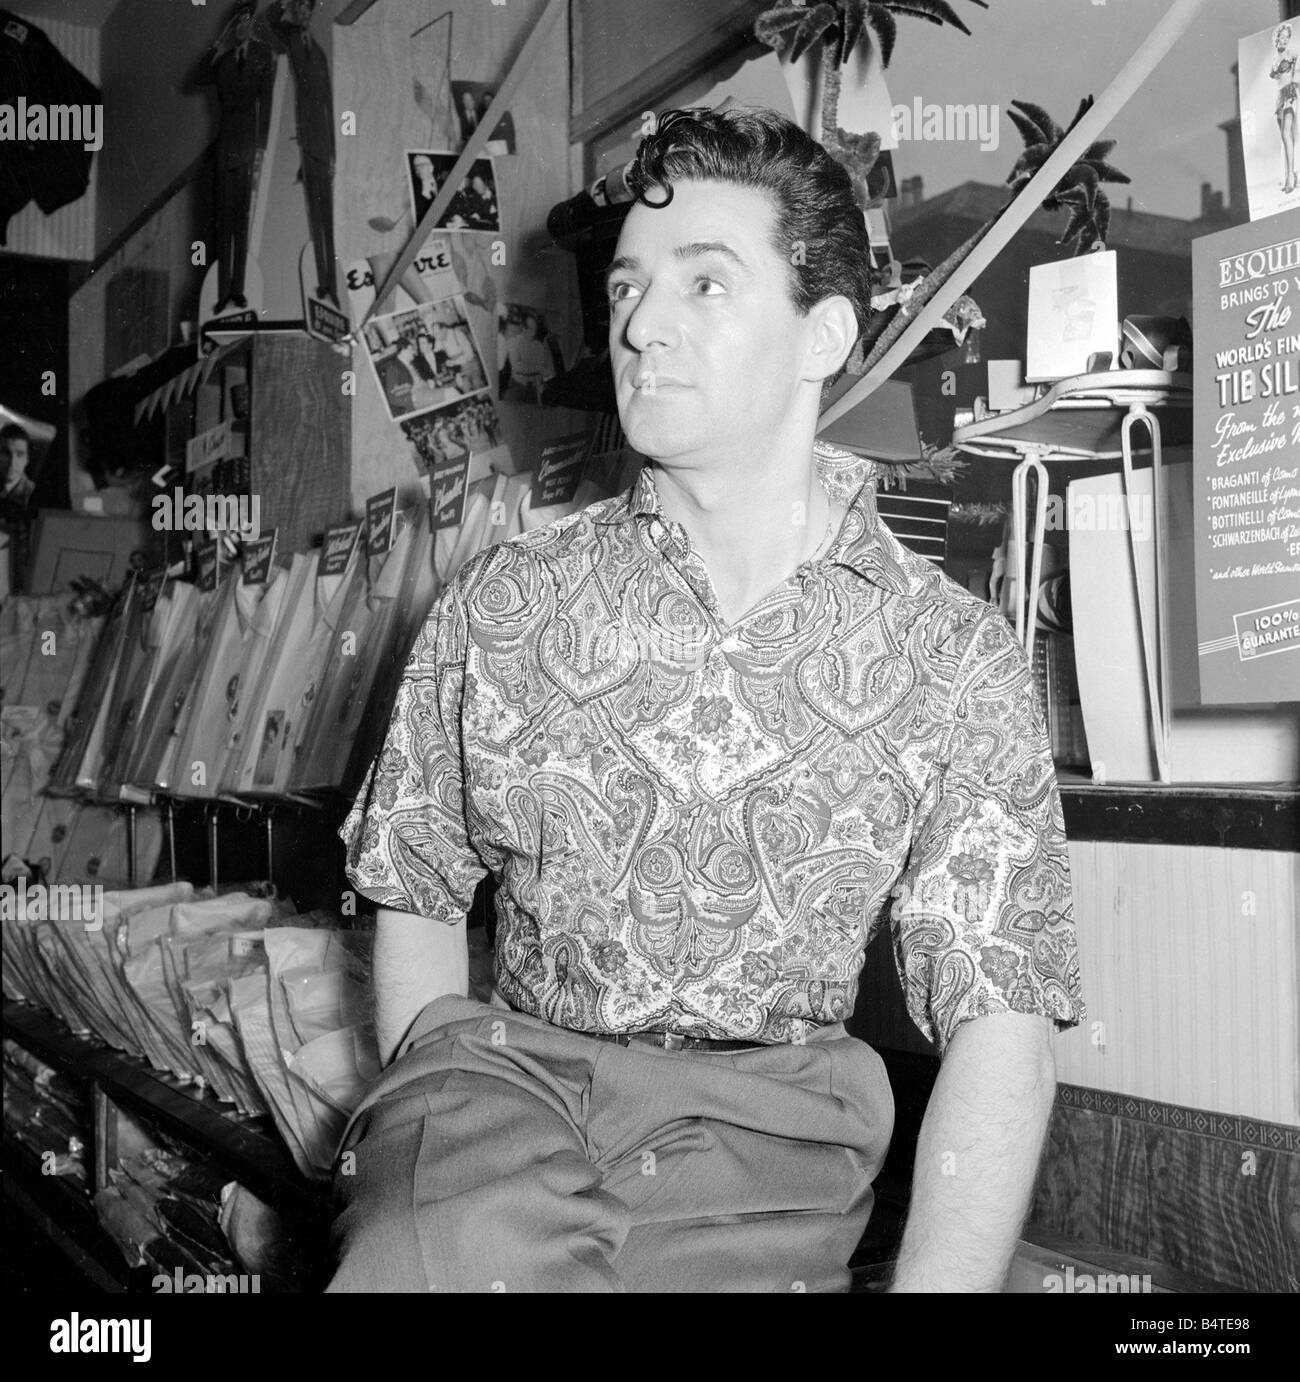 A Rock Hudson look a like models one of the unique dshirts designs to be found in Glasgow s Esquire Shirt Boutique Our Picture Shows a Paisley print short sleeve shirt Circa 1958 Stock Photo